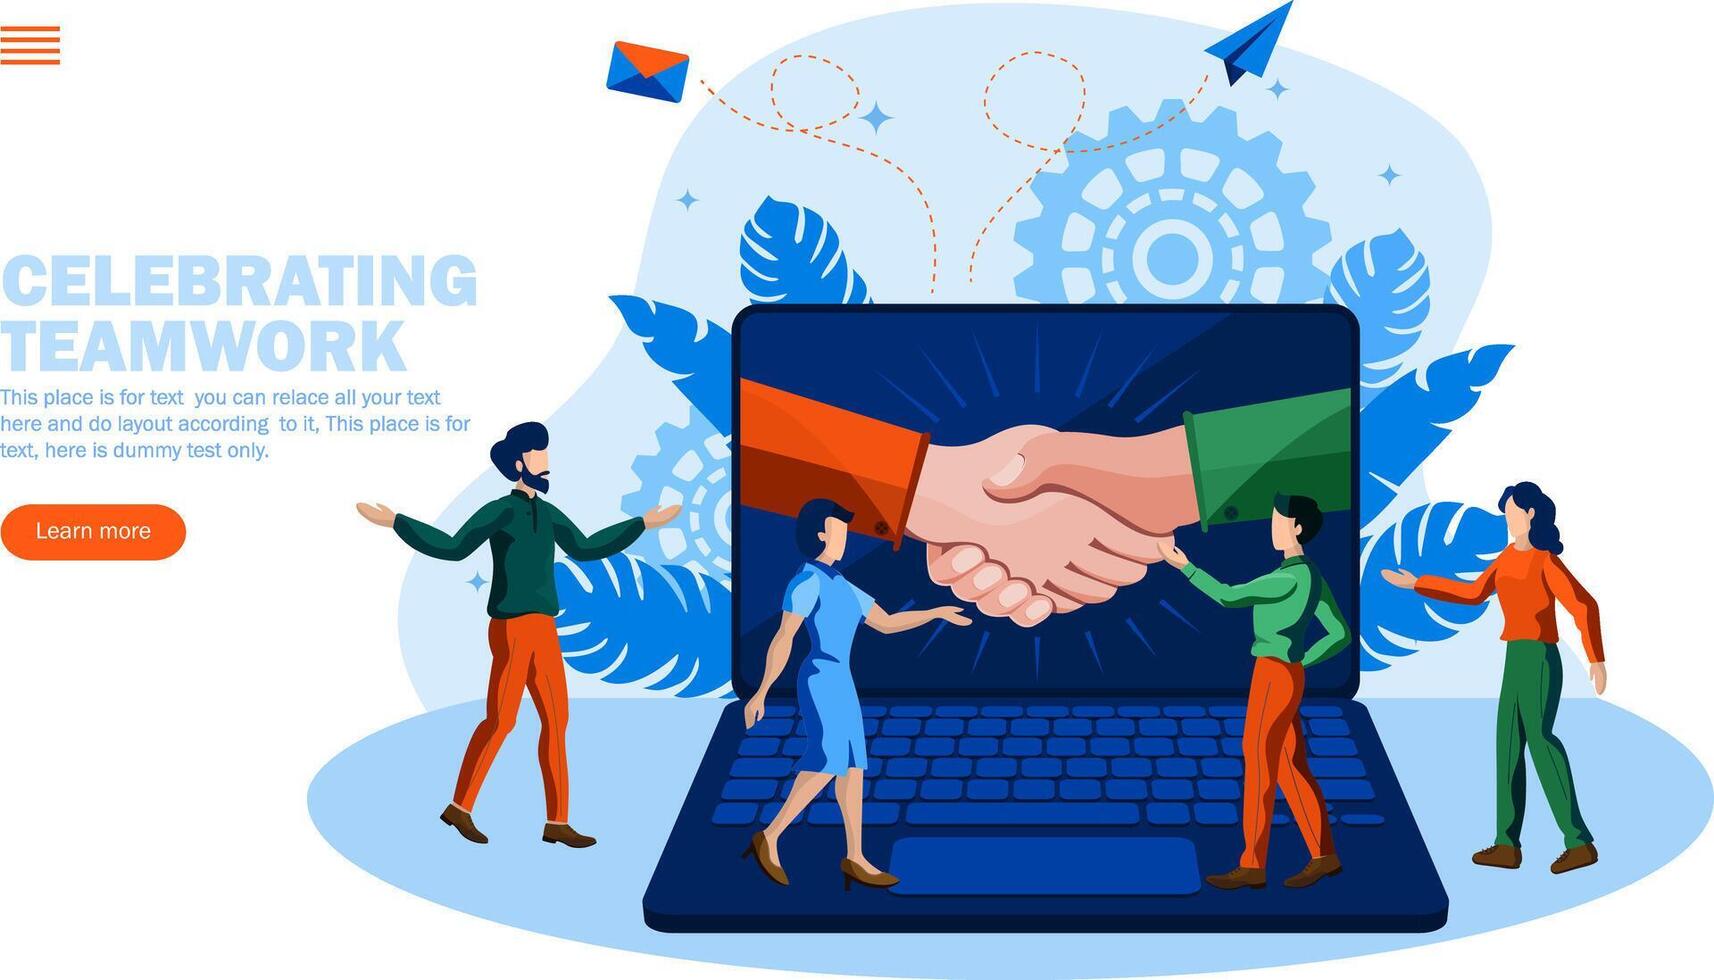 people celebrating teamwork and processes with joining hands in computer concept vector illustration